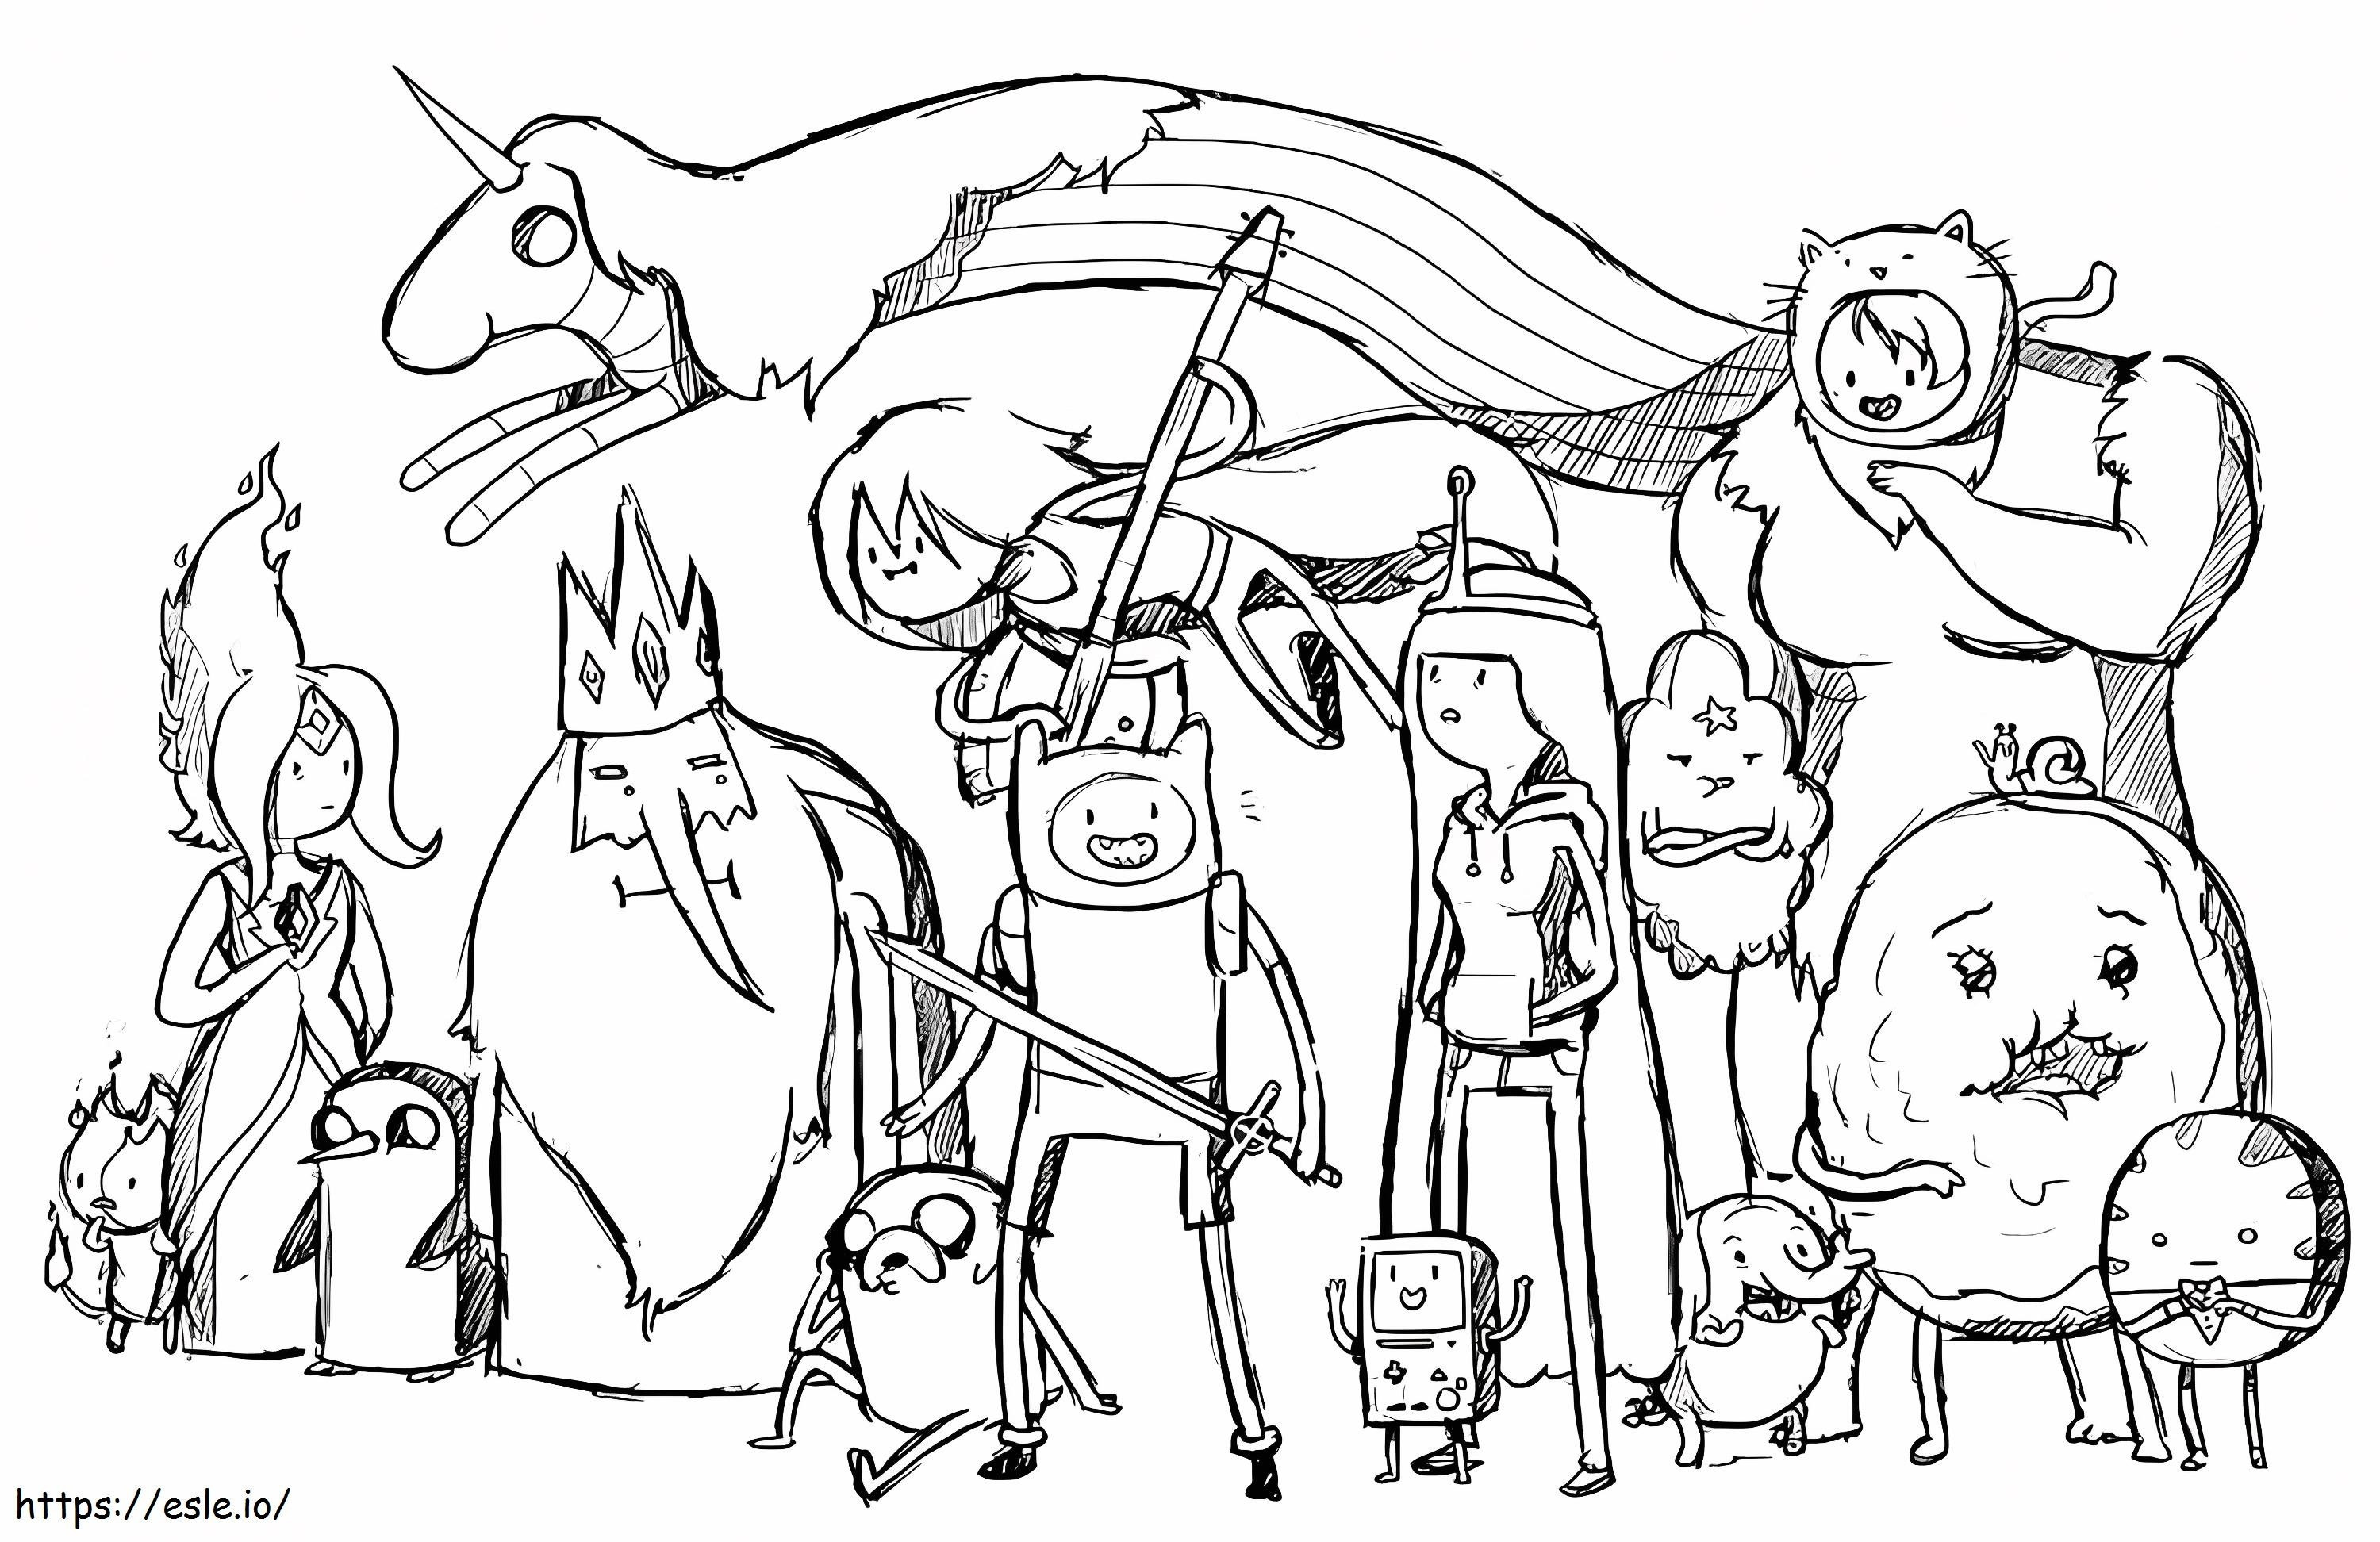 Drawing Adventure Time Characters coloring page